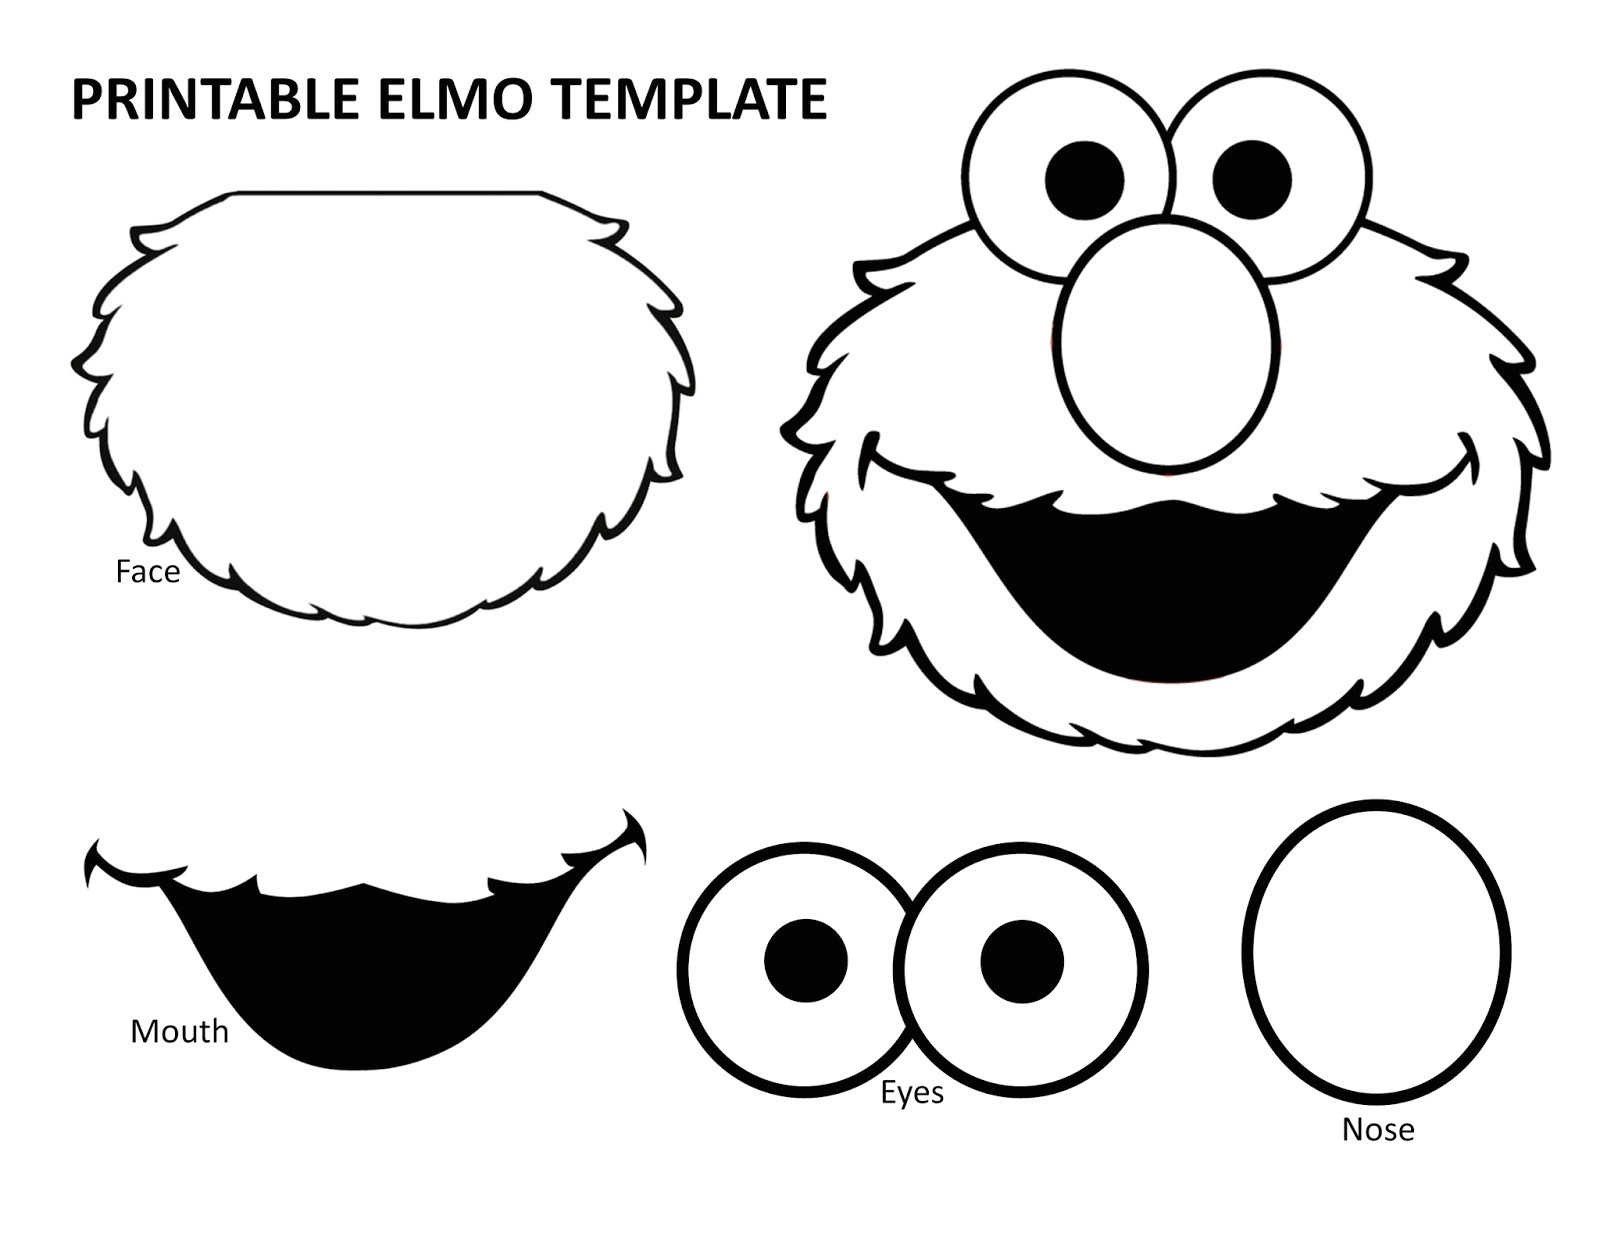 Printable Elmo Cake Template Richly Blessed Emery Turns Two Elmo Birthday Party